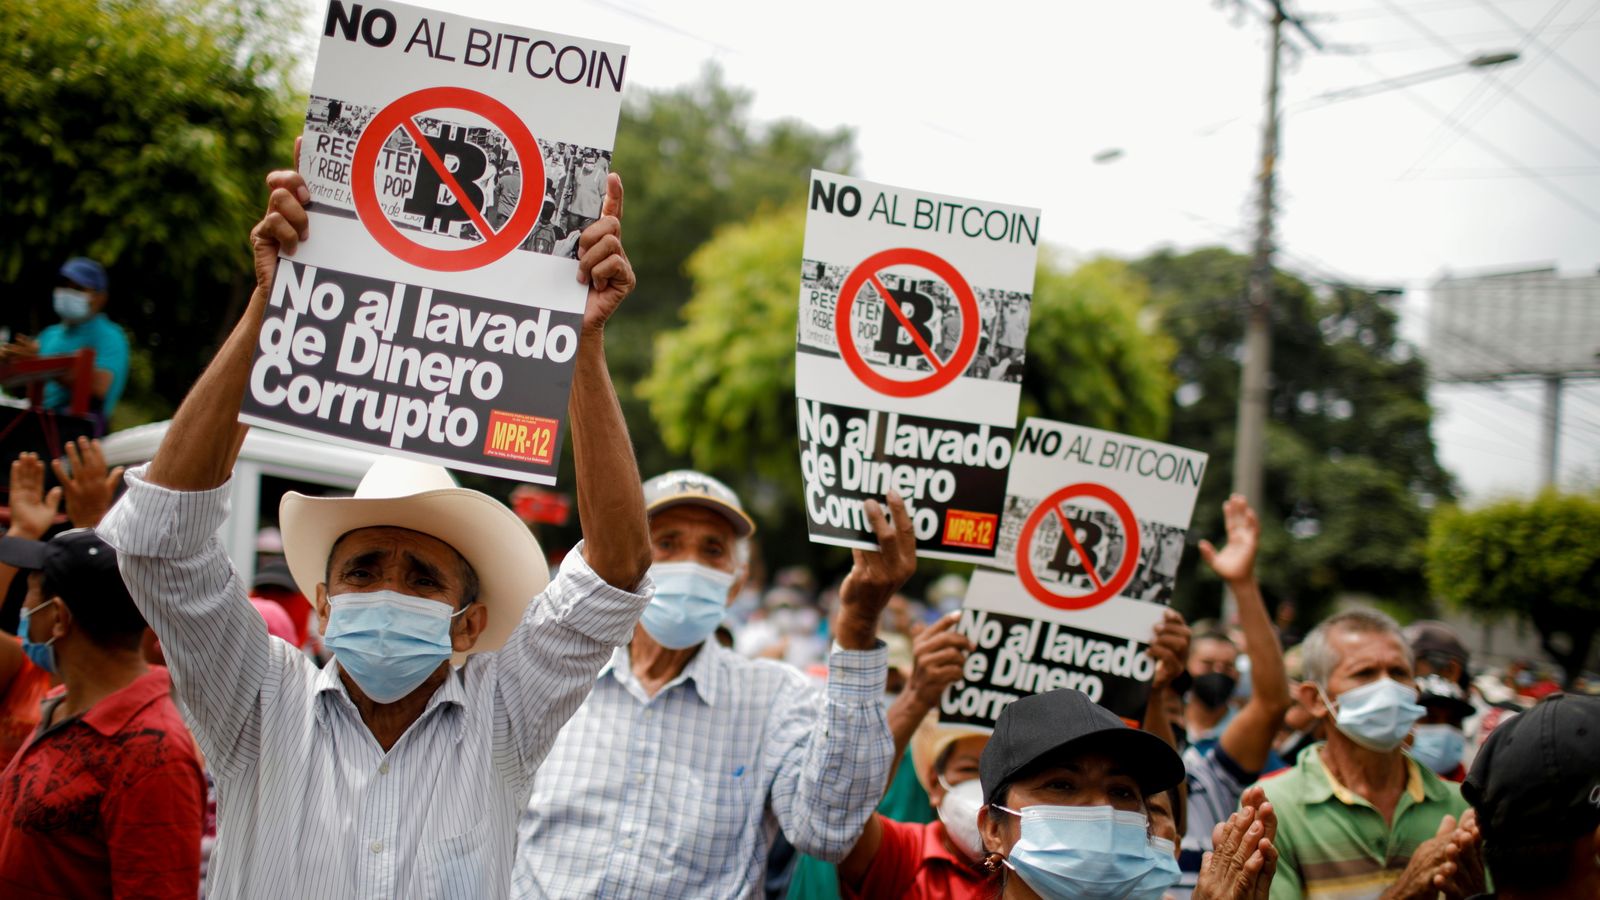 El Salvador's national Bitcoin system crashes as cryptocurrency becomes legal tender